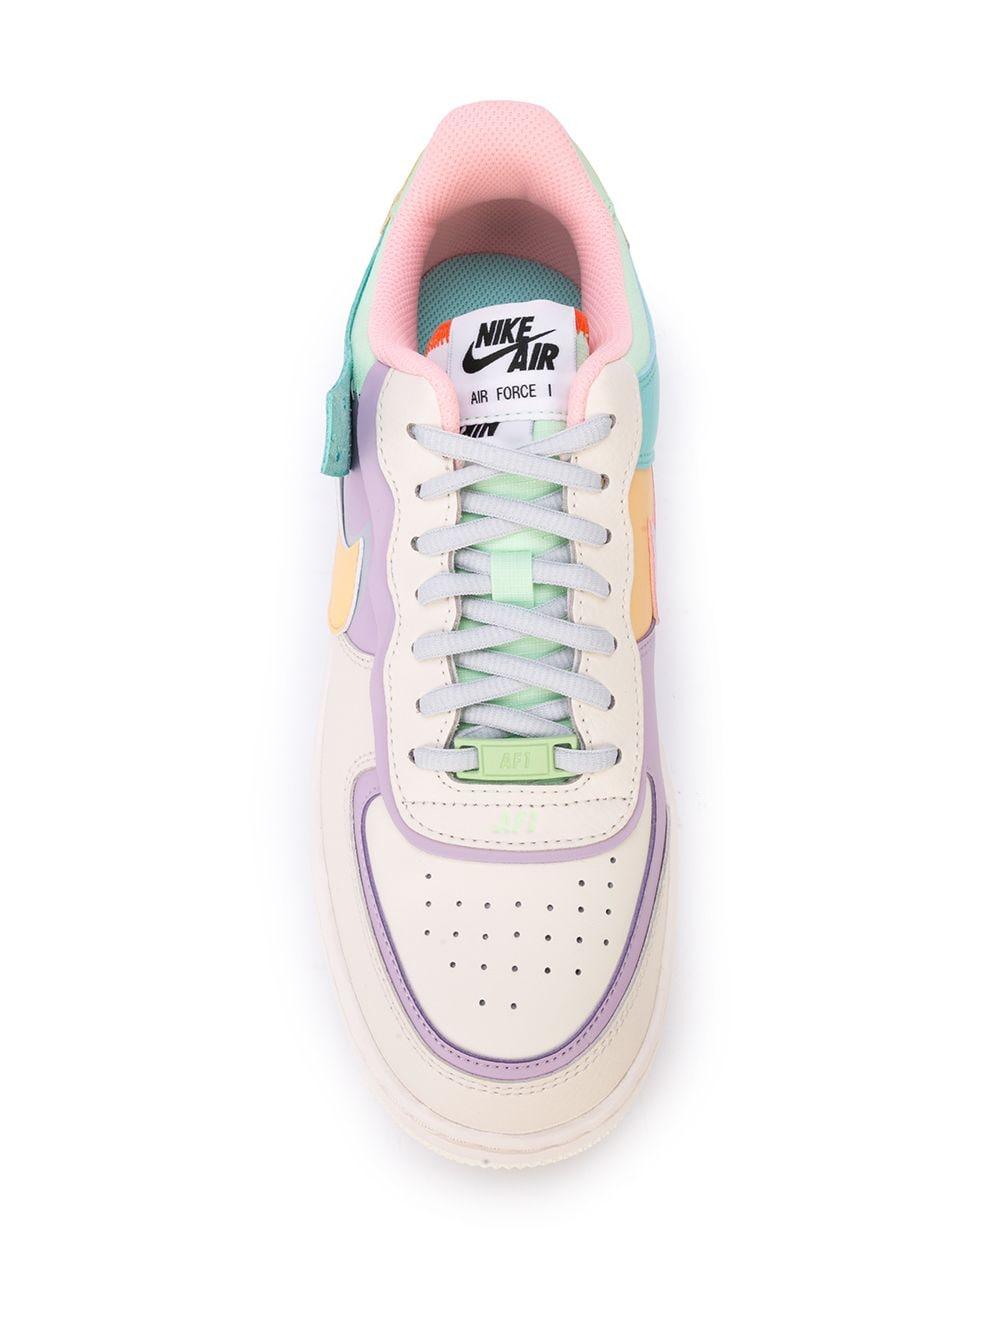 rural Armonioso oscuro Nike Af1 Shadow "pale Ivory/pastel Multicolor" Sneakers in White | Lyst